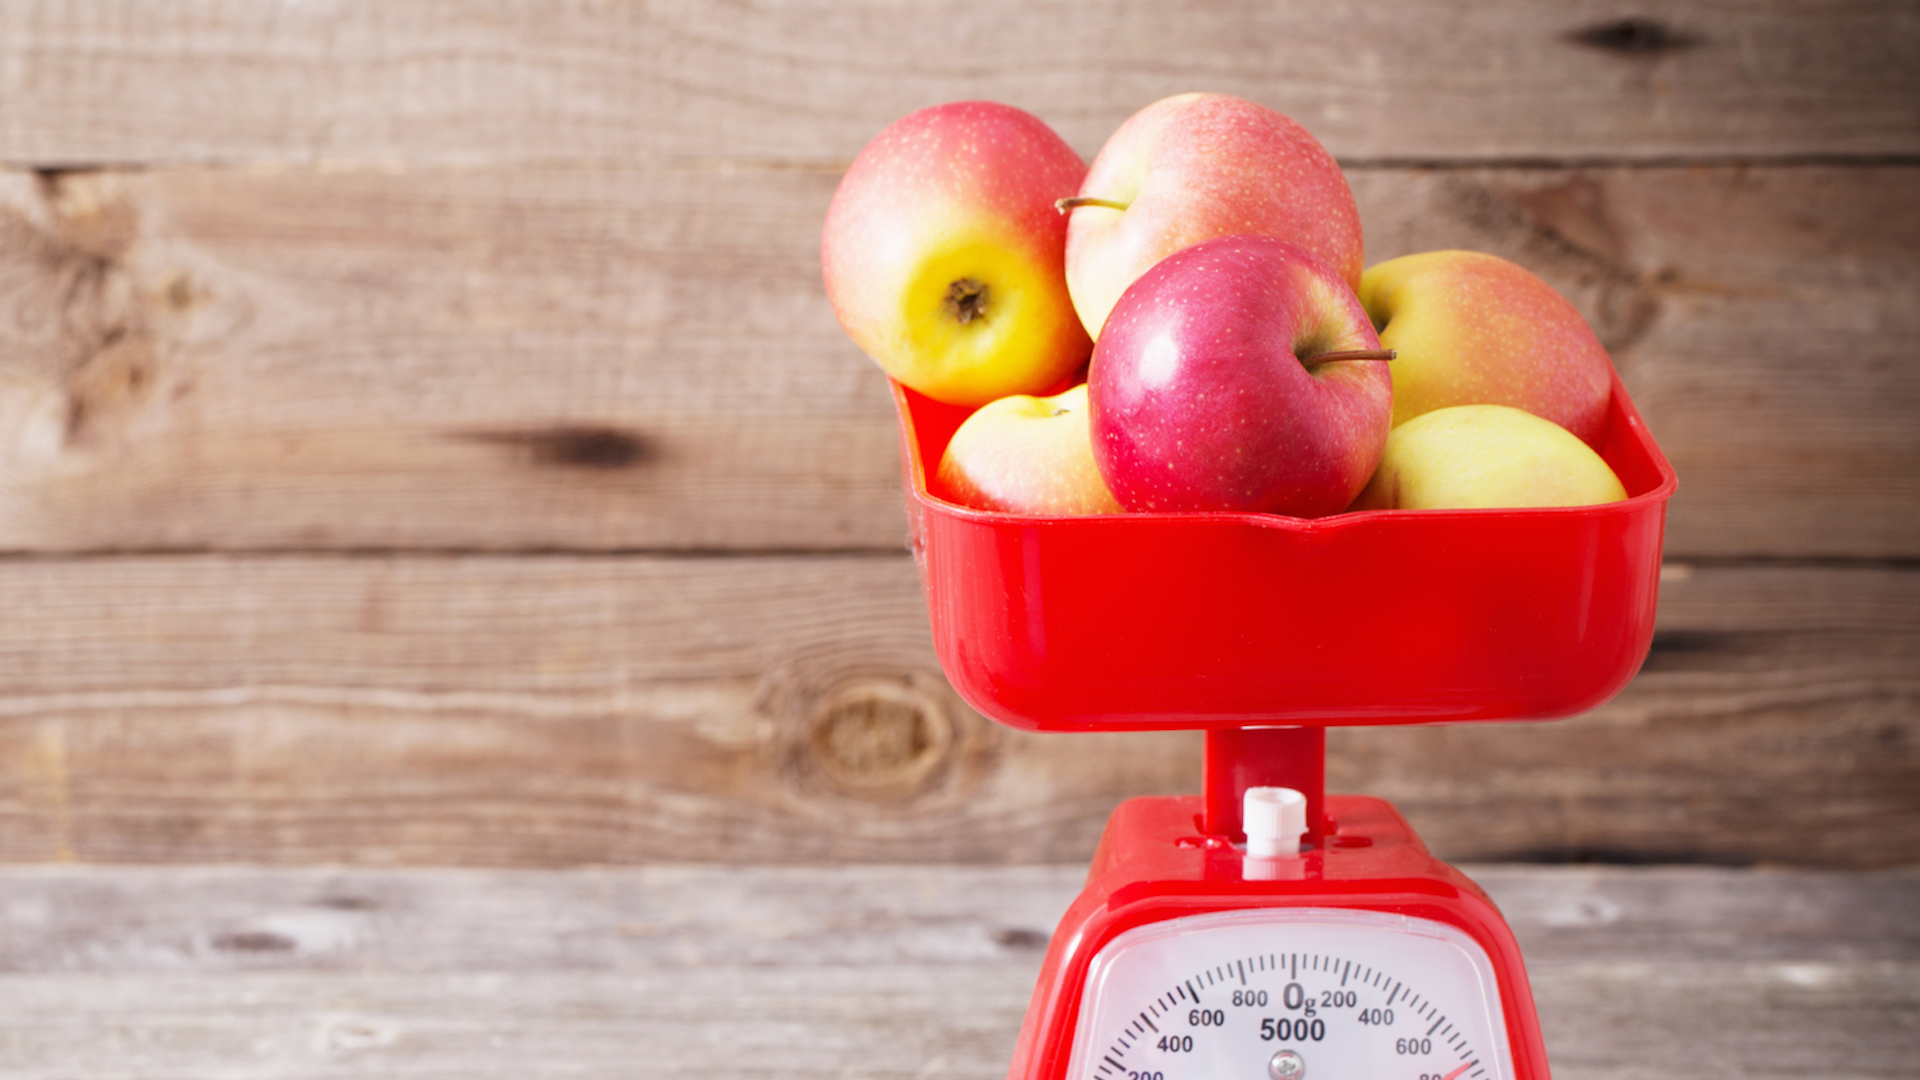 Kitchen scales weighing some apples